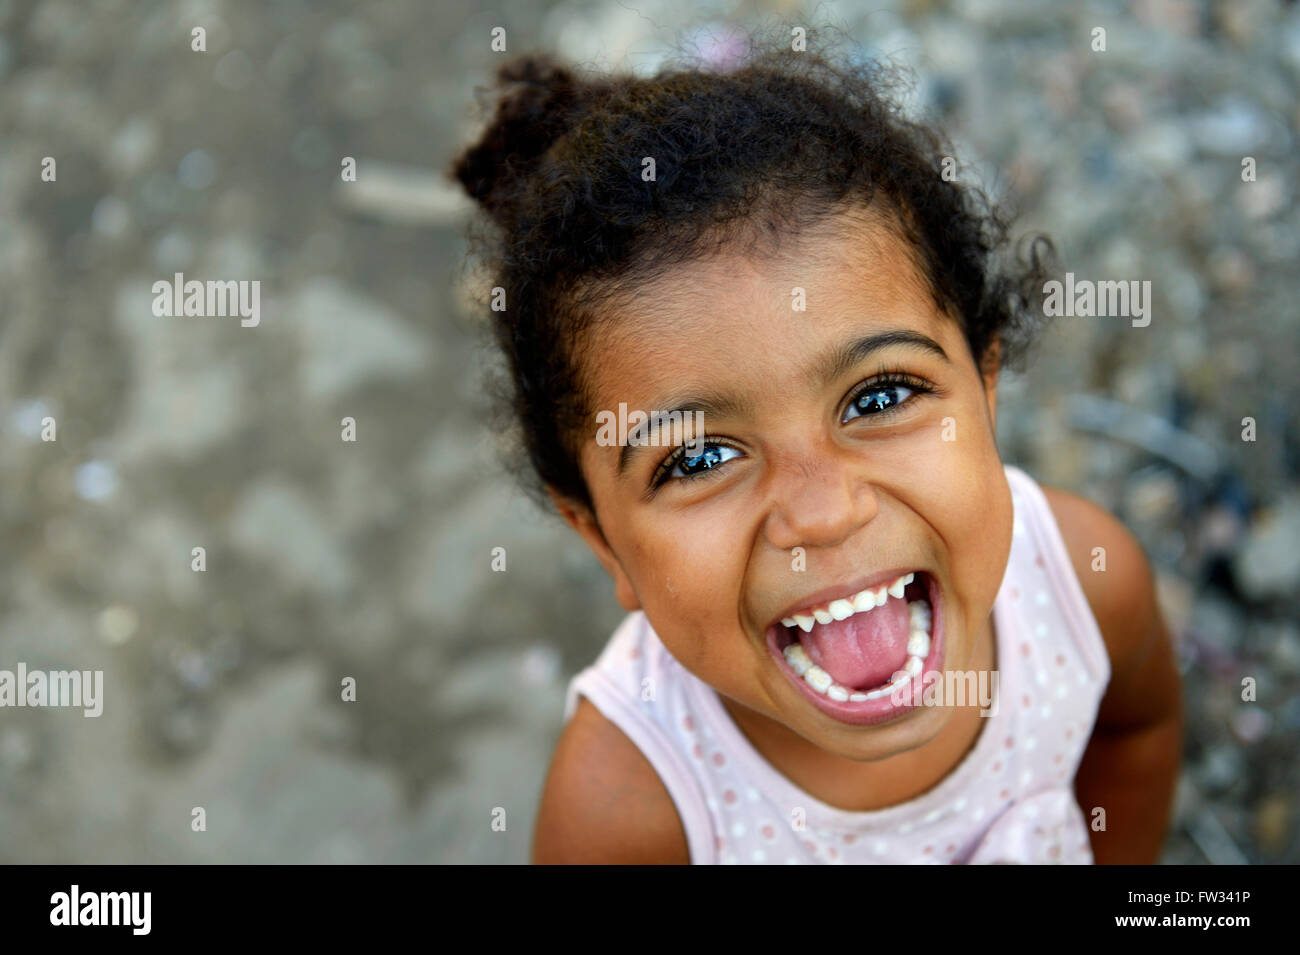 Laughing girl, 3 years, in a favela, Favela 21 de Abril, São Paulo, Brazil Stock Photo